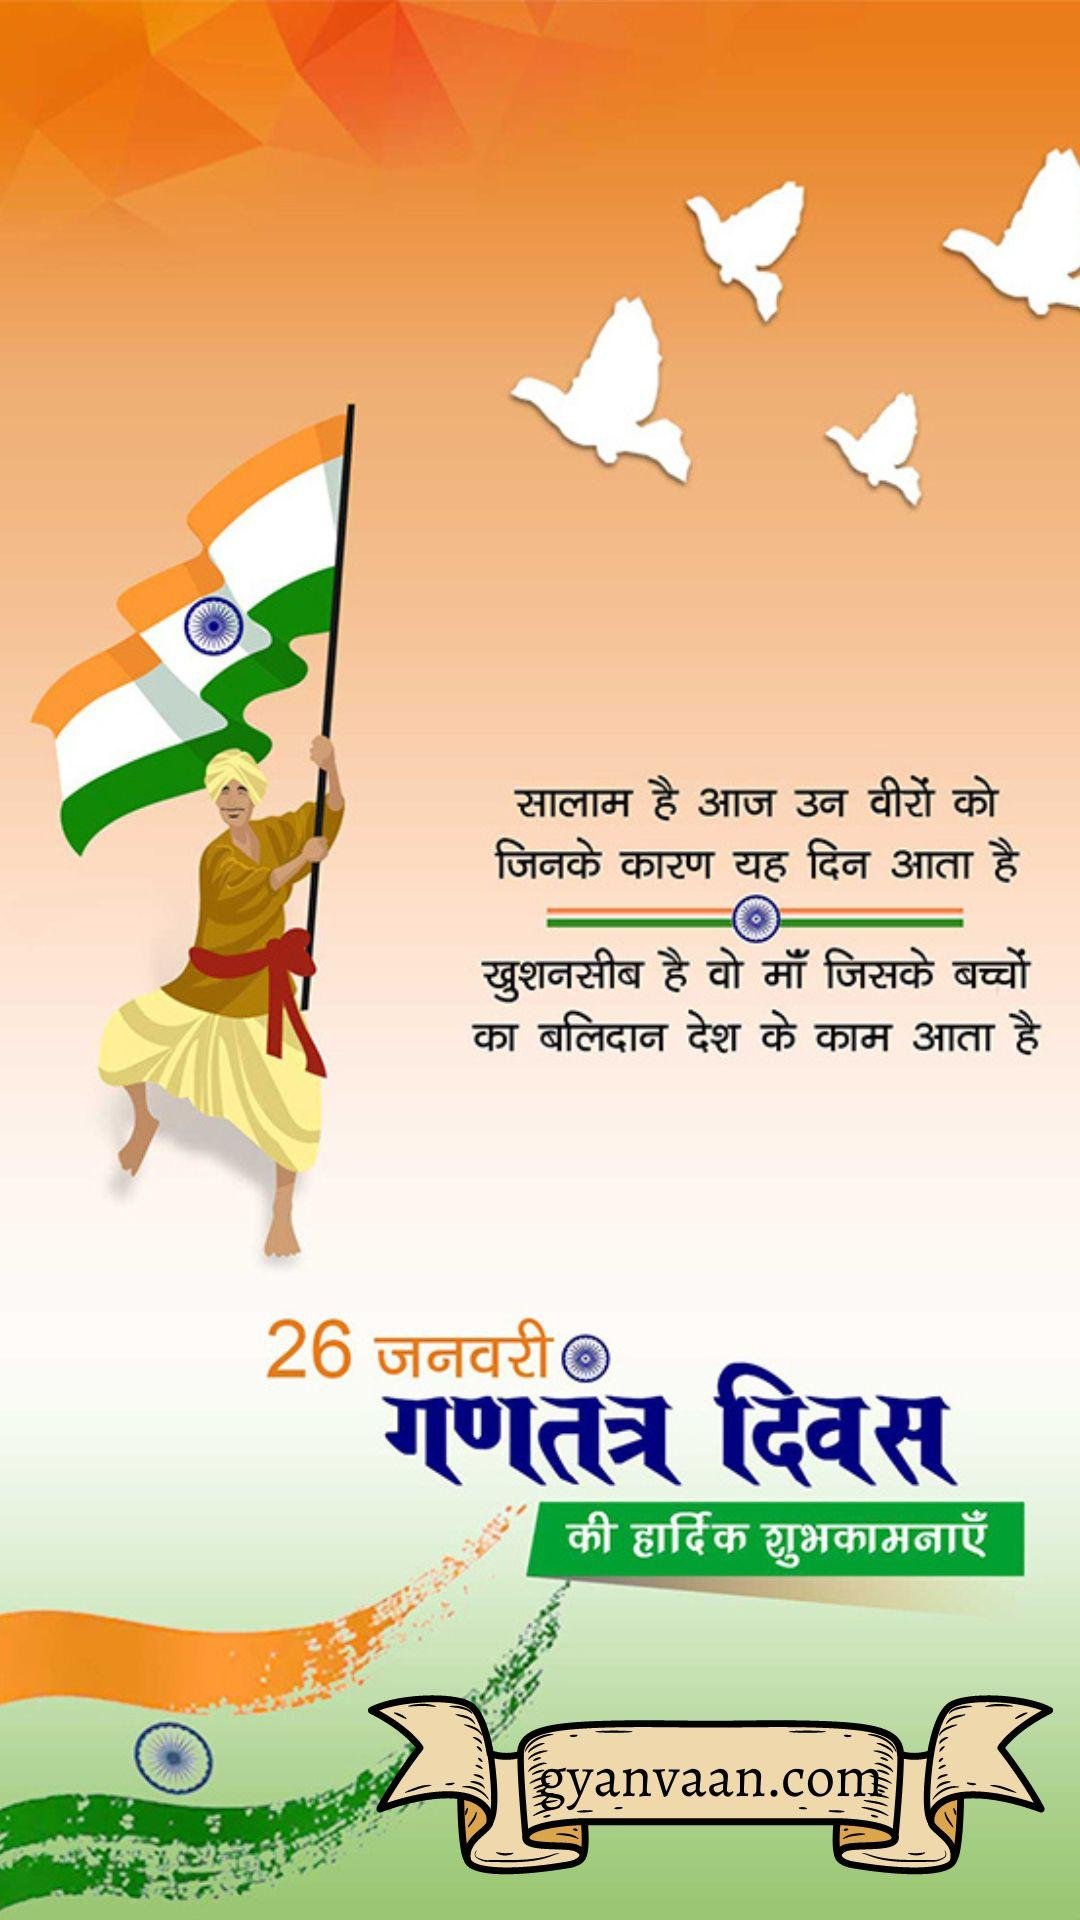 Republic Day Quotes In Hindi With Status And Shayari 10 - Republic Day Quotes In Hindi